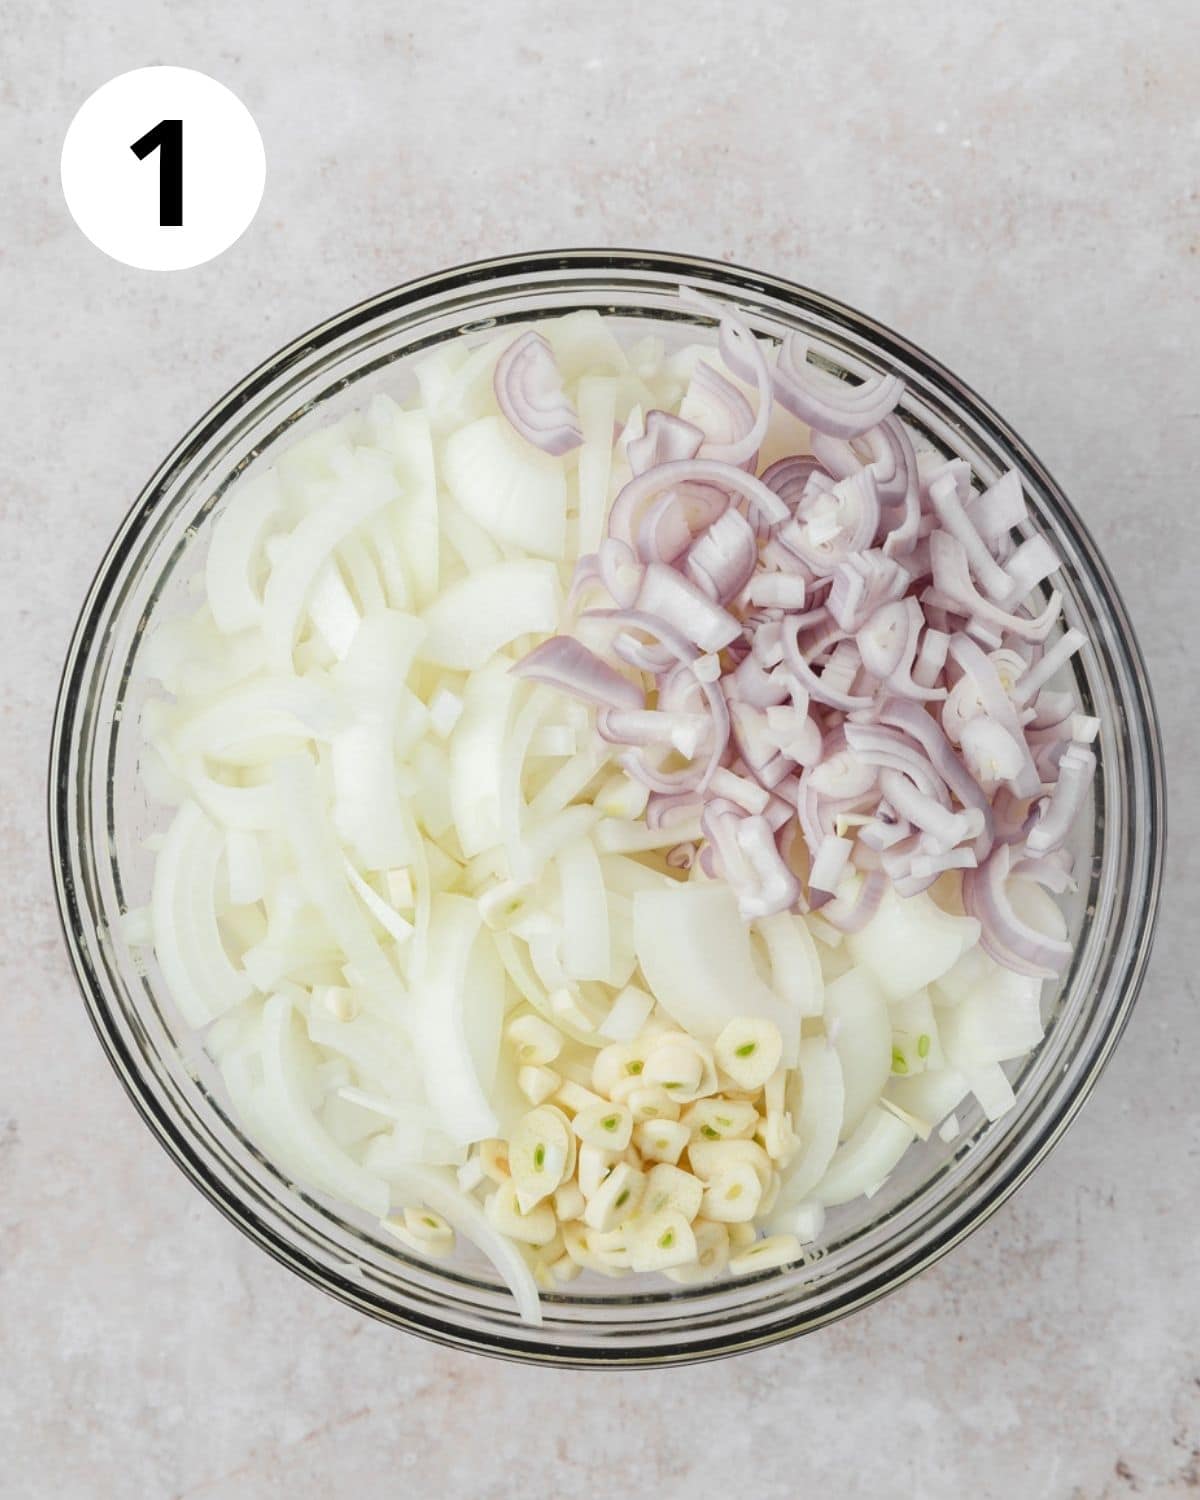 sliced onions and shallots in bowl